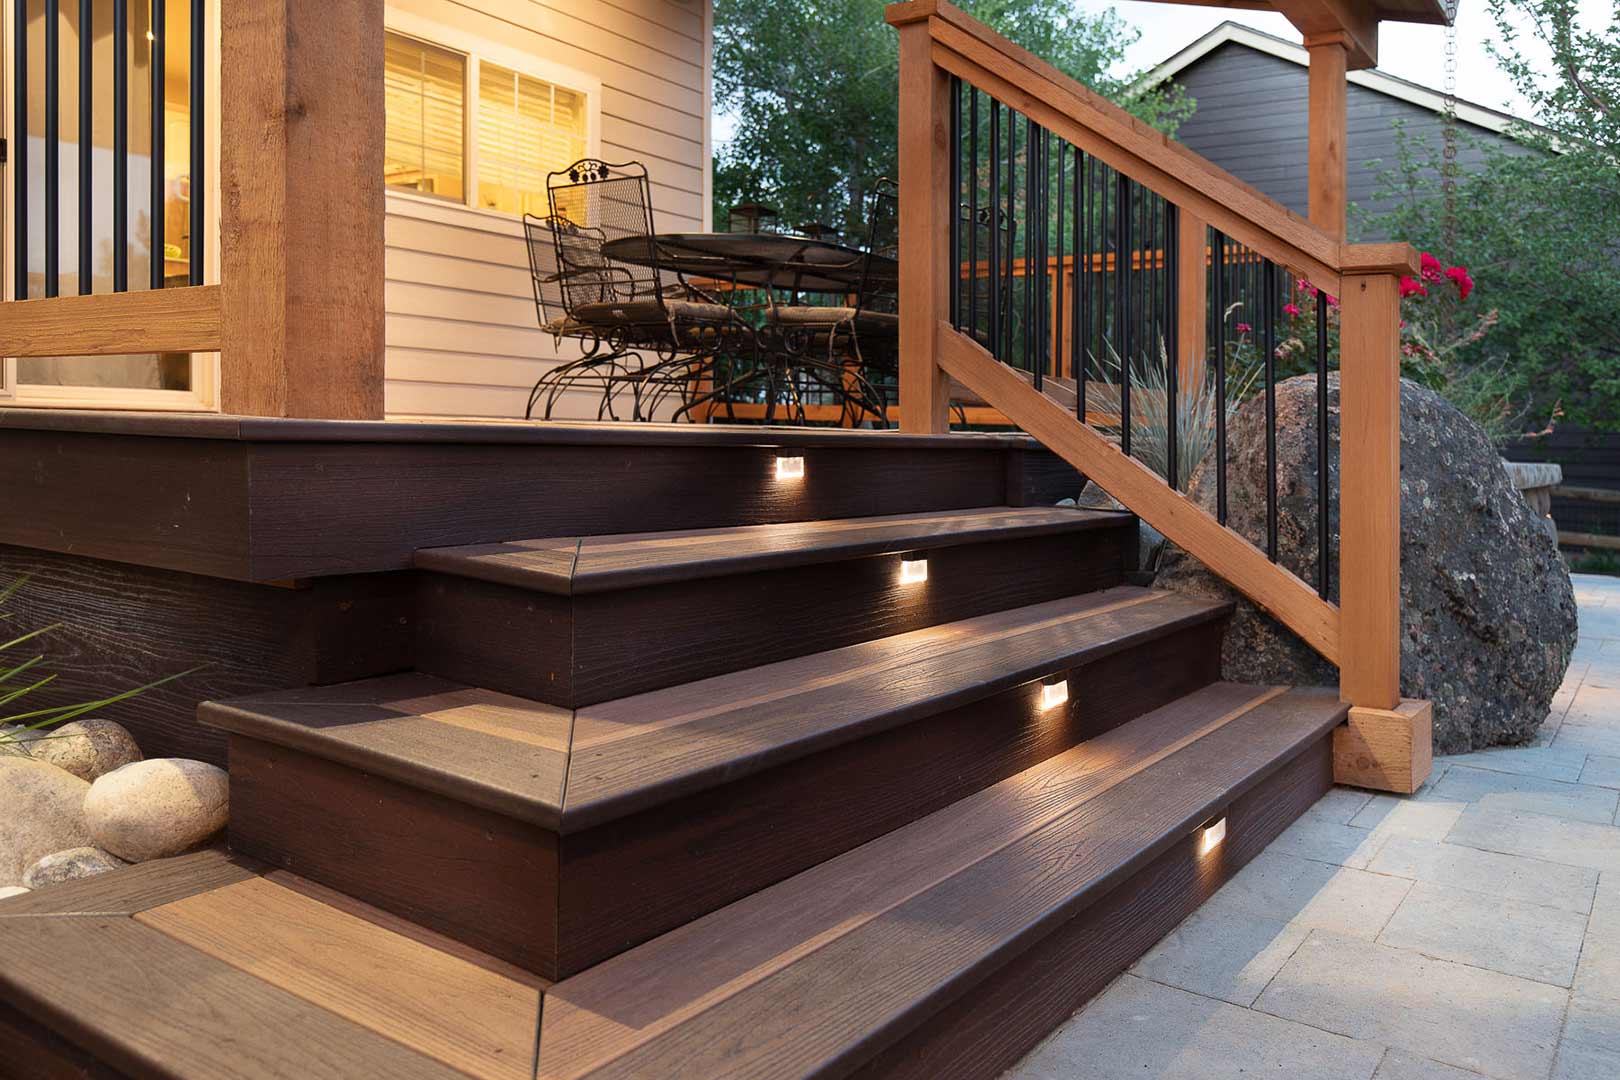 Detailed view of integrated lighting in the stair steps of the custom built cover deck of the Golden Current Boulevard project by Freestone Design-Build